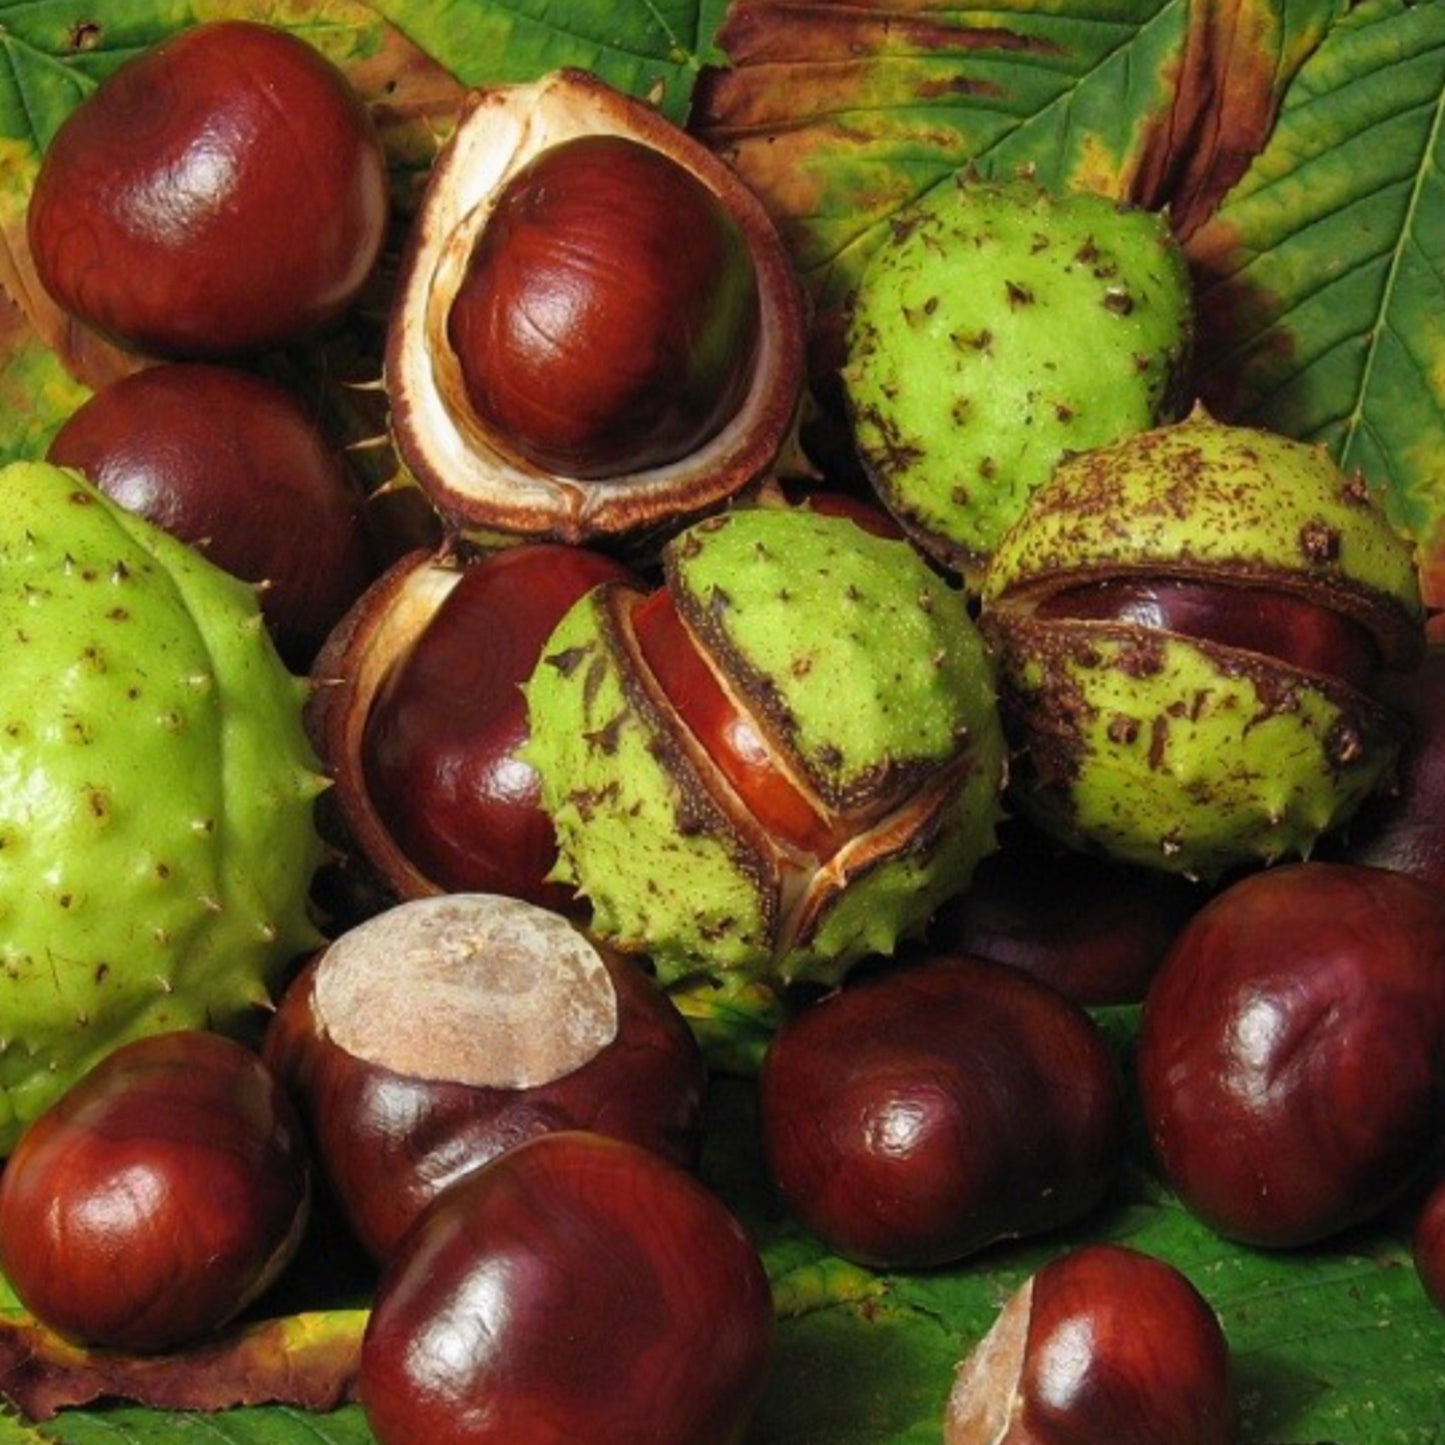 2 Horse Chestnut Extract 20% Aescin - Two Ingredients